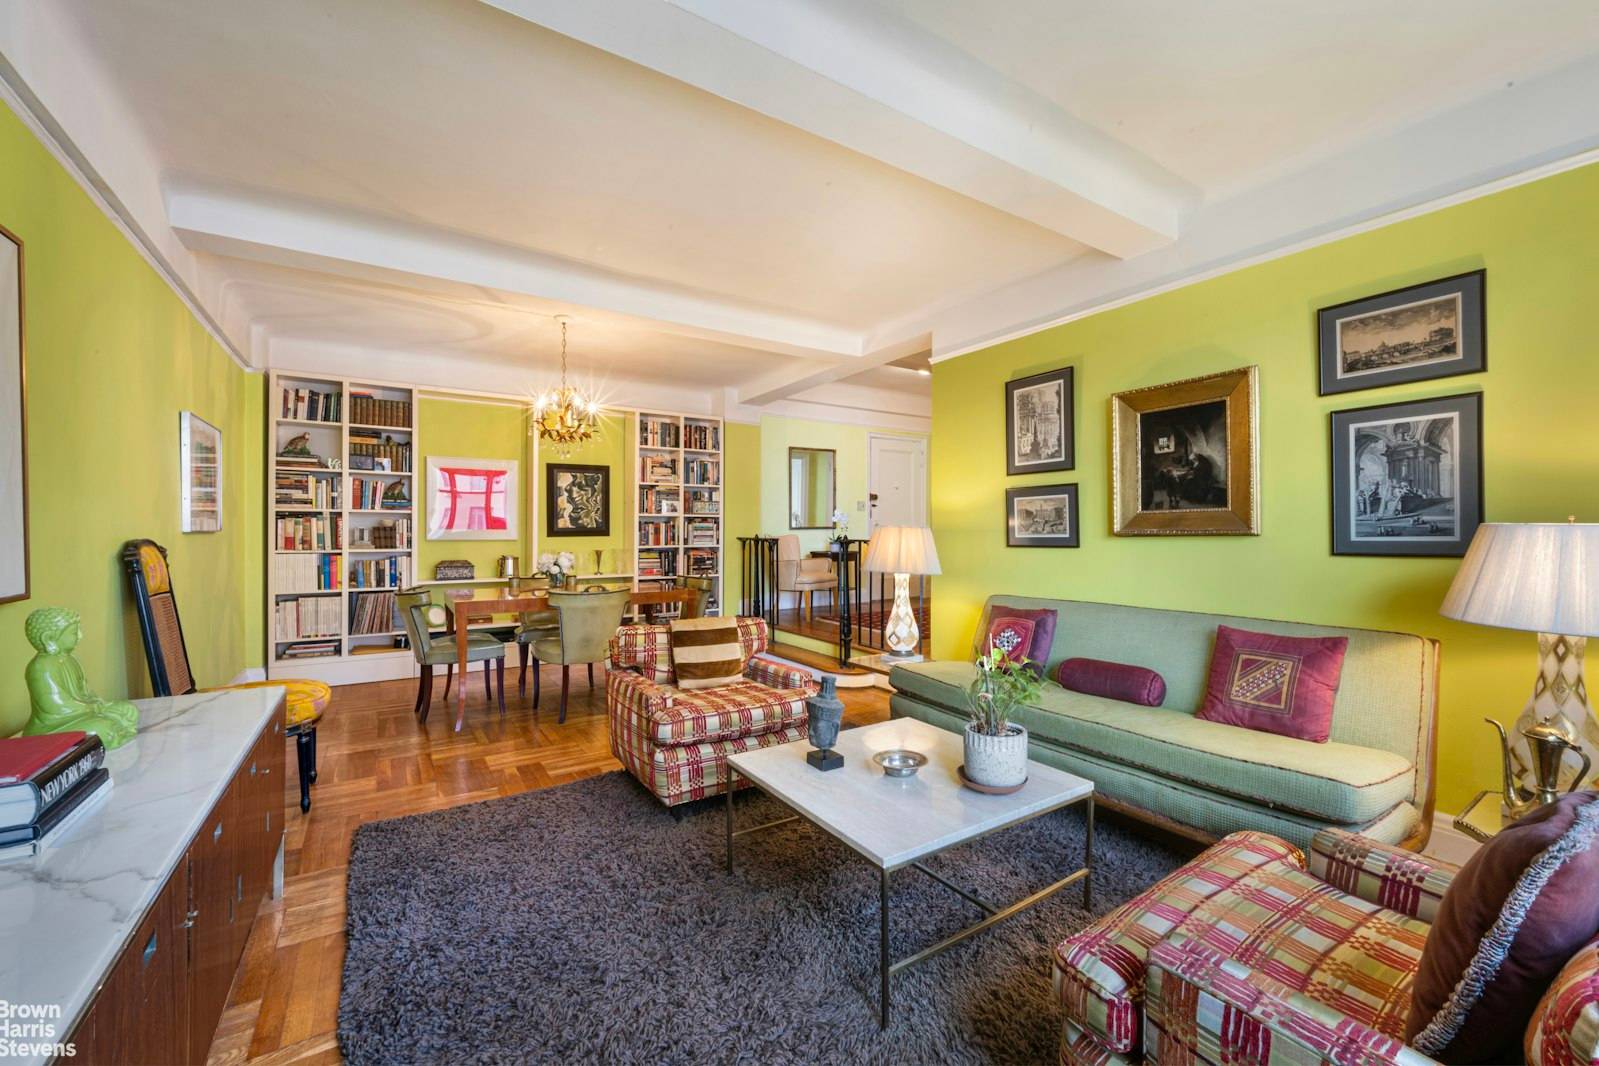 Move right into this rarely available gem a B line one bedroom, one bathroom home situated within a highly coveted pre war building.